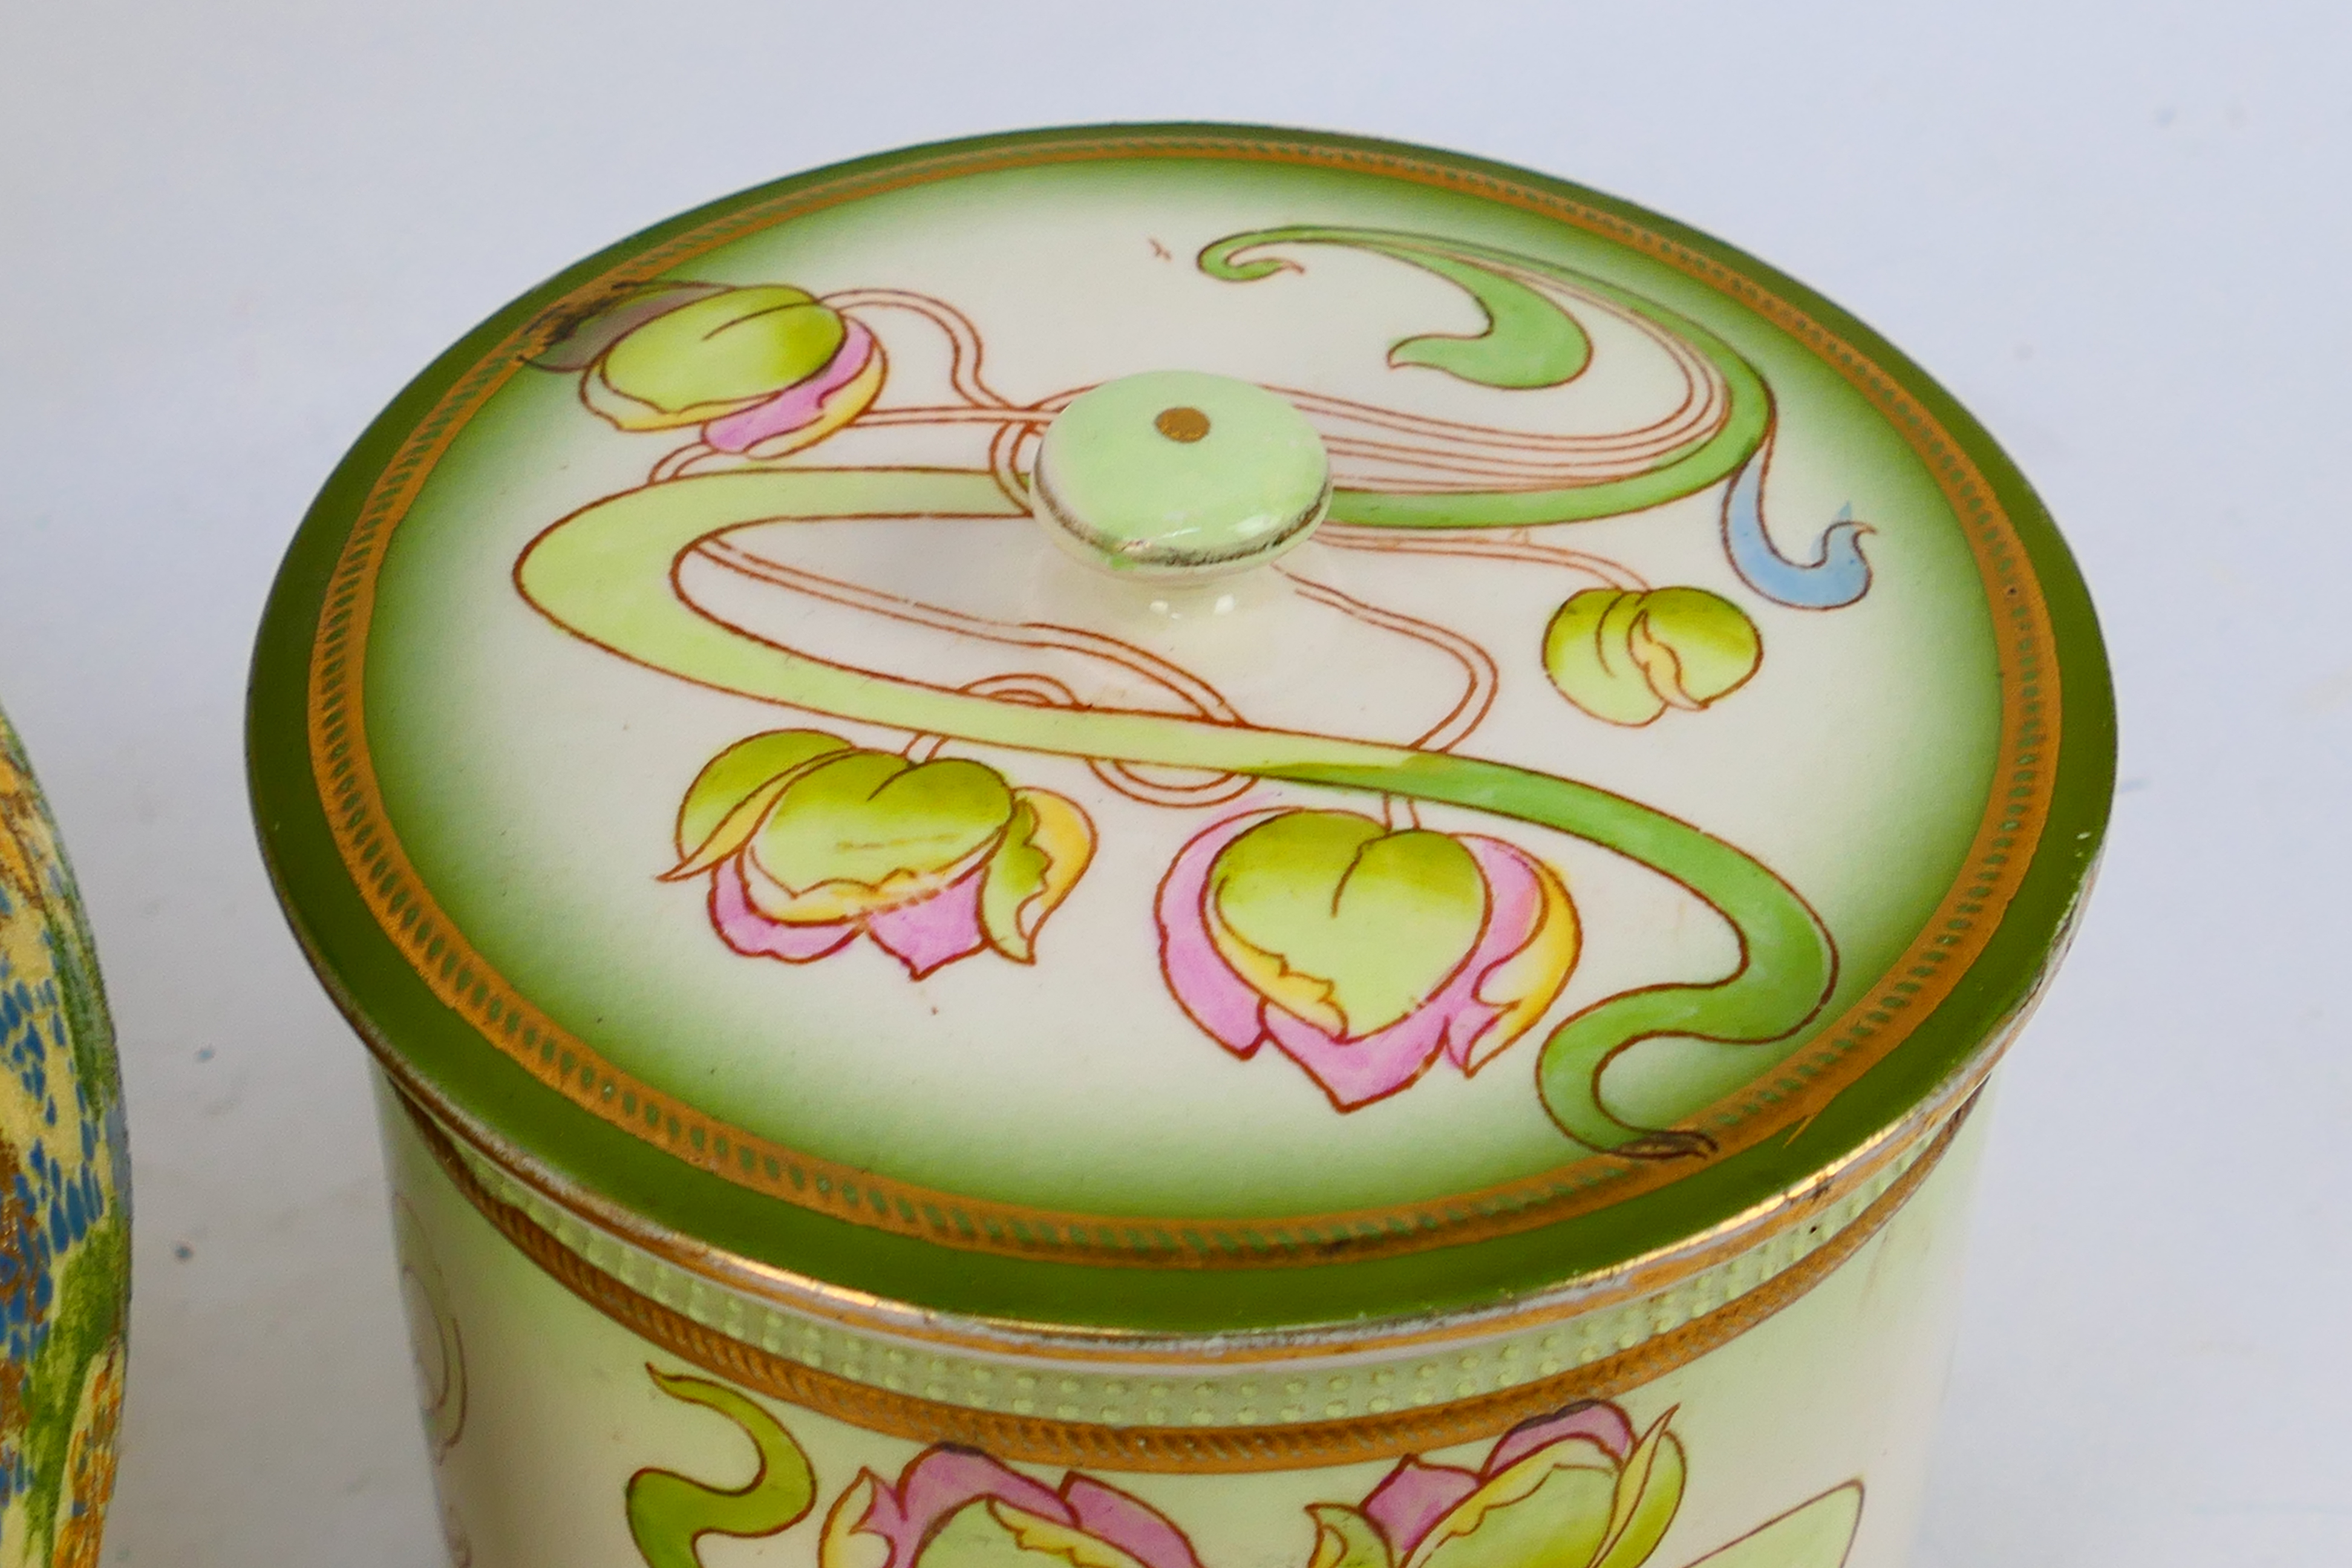 Lot to include a Doulton jardiniere with - Image 3 of 8